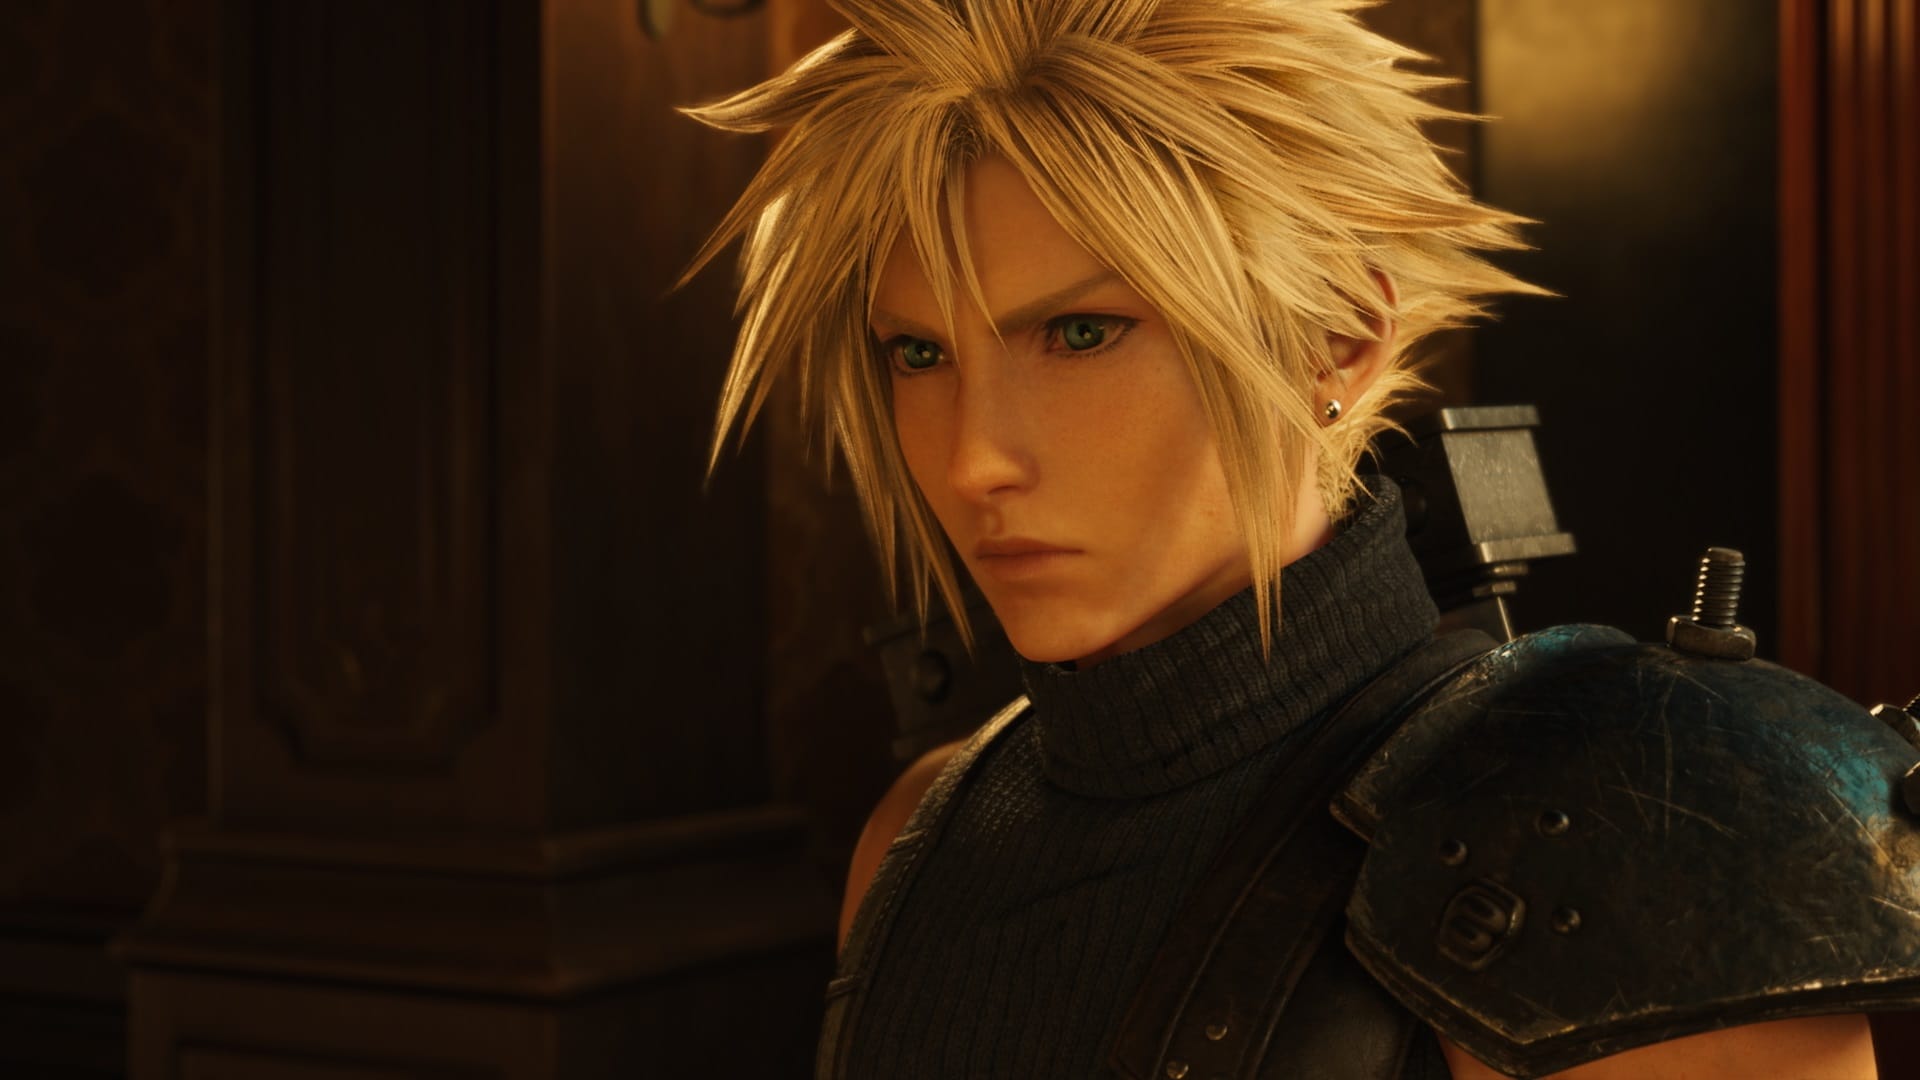 FF7 Remake Part 2 hits winter 2023, but not on PC